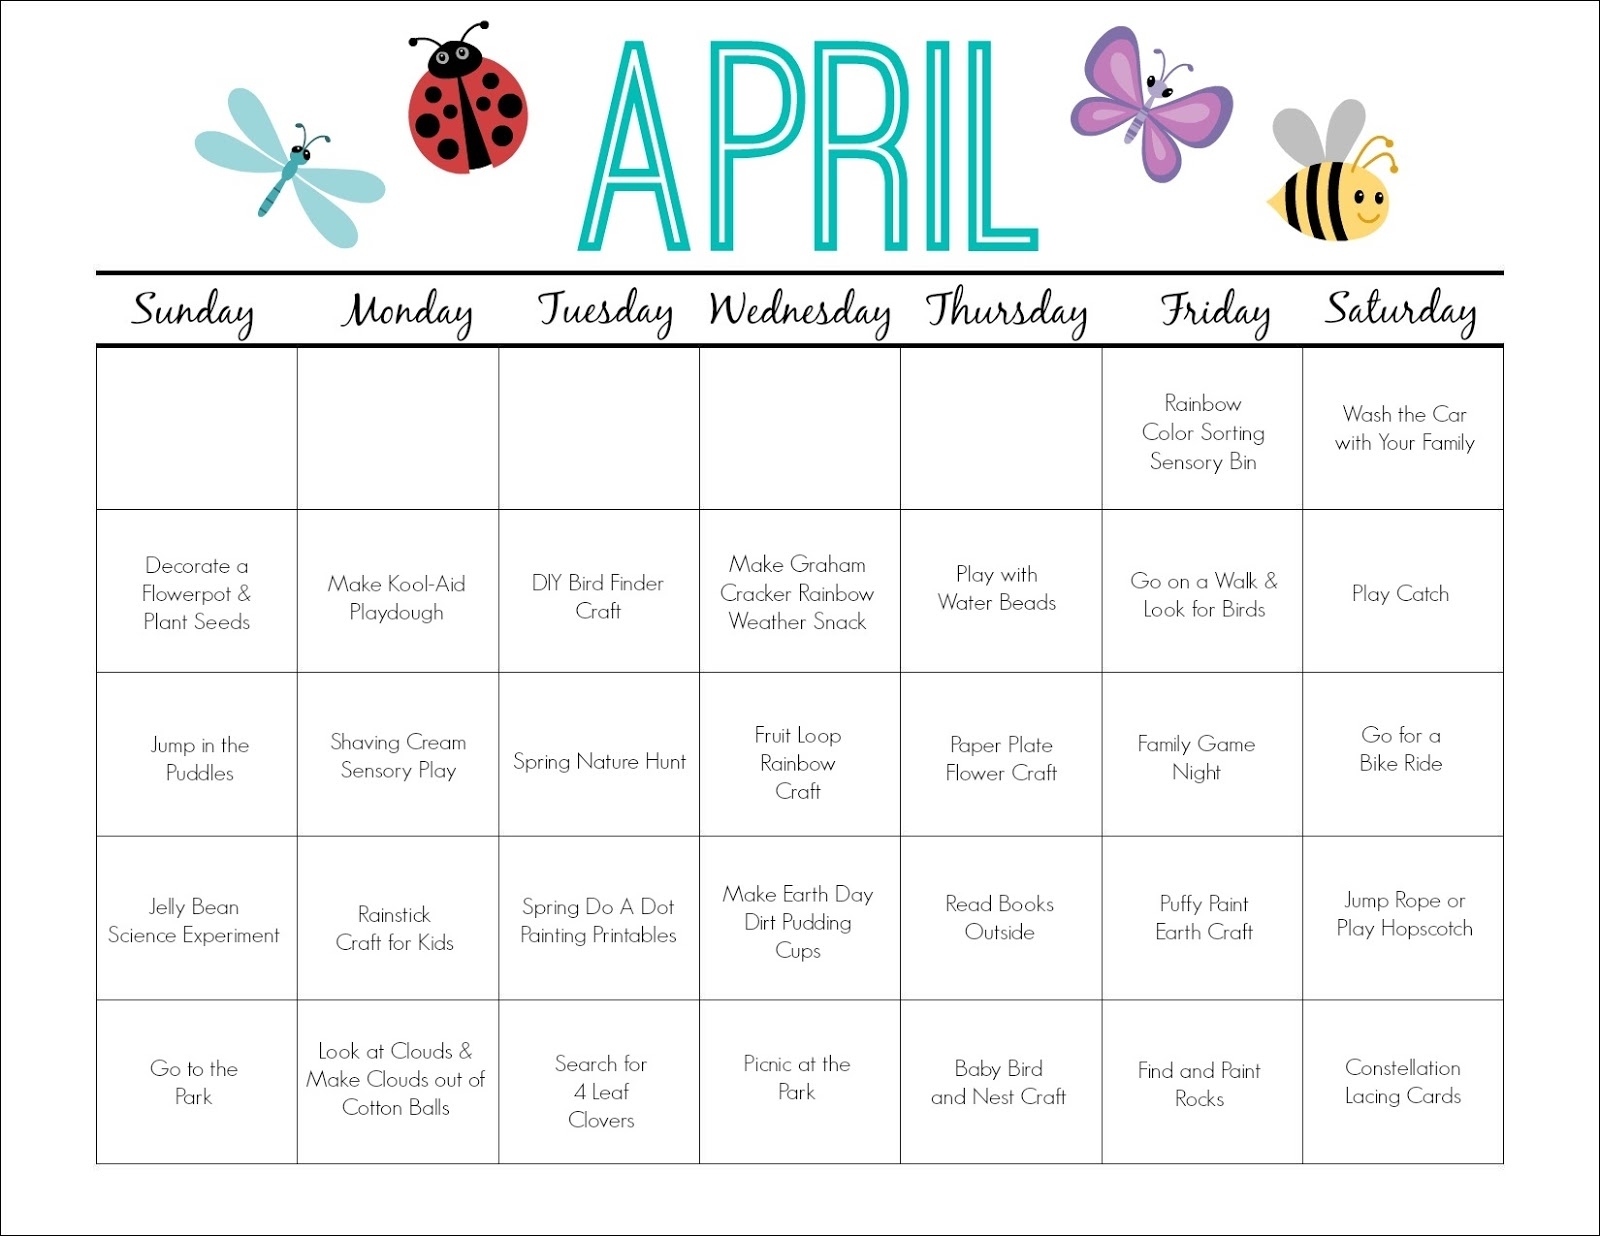 Printable Activity Calendar For Kids: Free Printable From